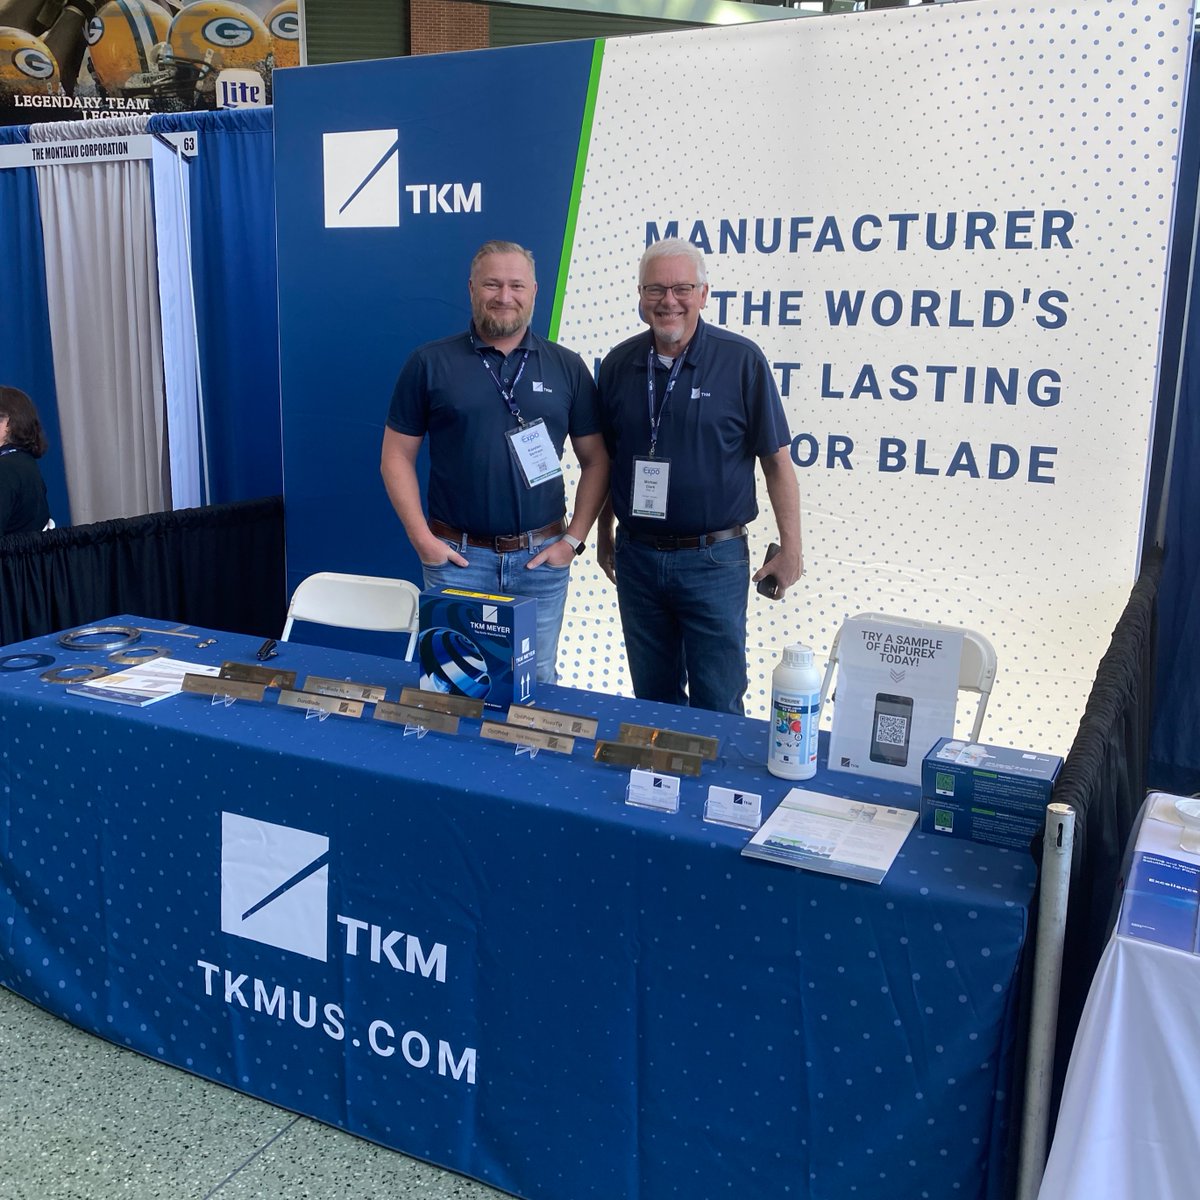 LIVE at Converter's Expo TODAY! Come by BOOTH #62 to find out what the world's longest lasting doctor blade can do for you. You might even be able to snag an enpurex sample!

#tkm #doctorblade #enpurex #duroblade #convexpo #converterexpo #printwithconfidence